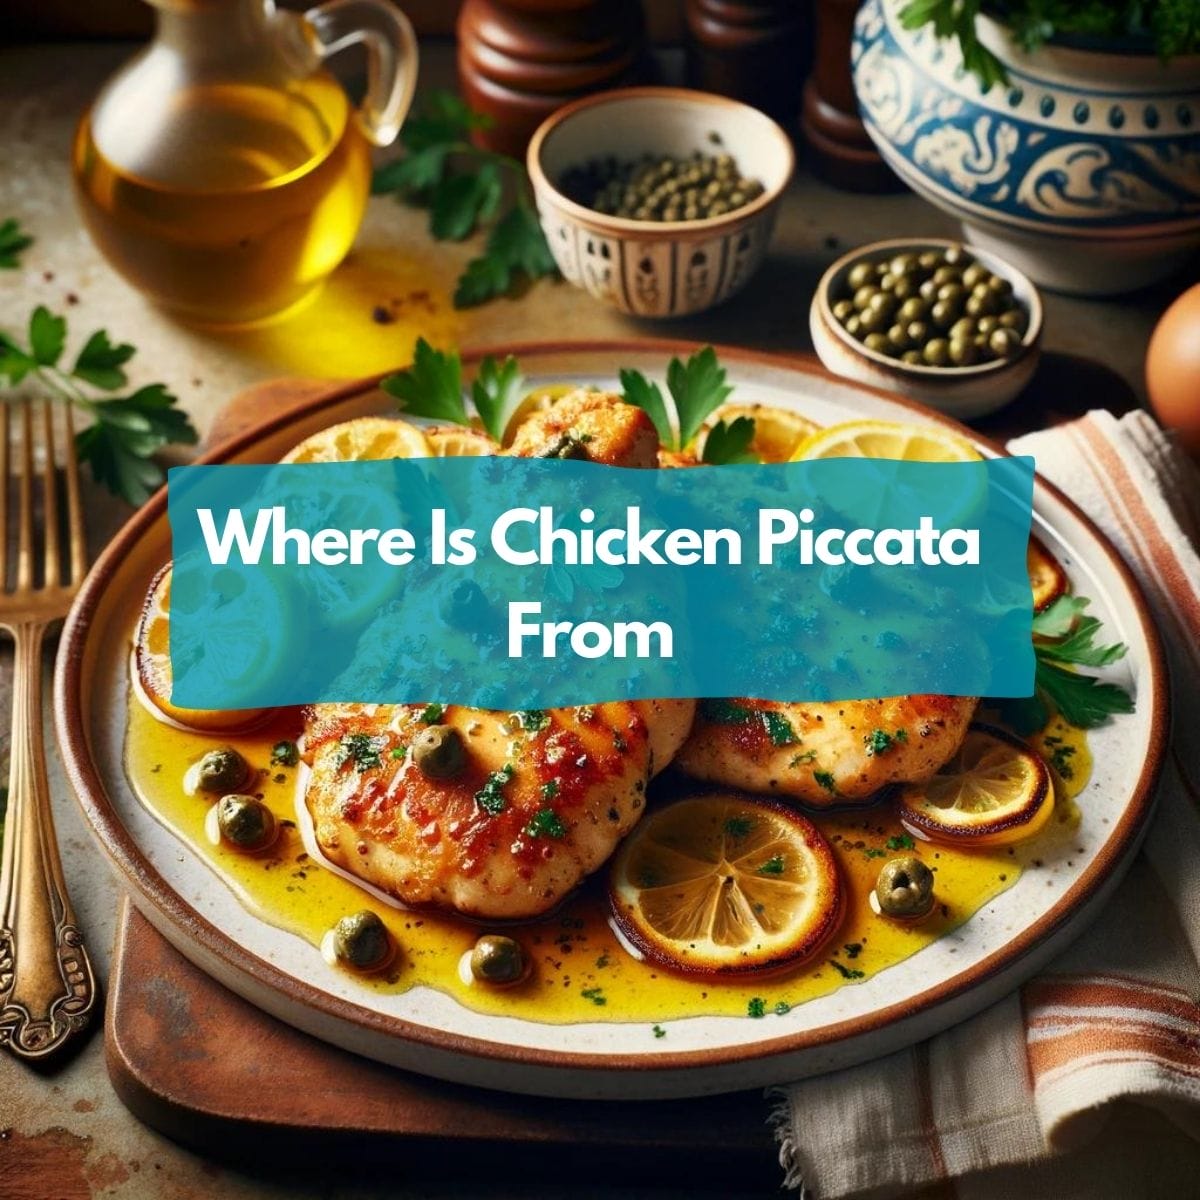 Where Is Chicken Piccata From